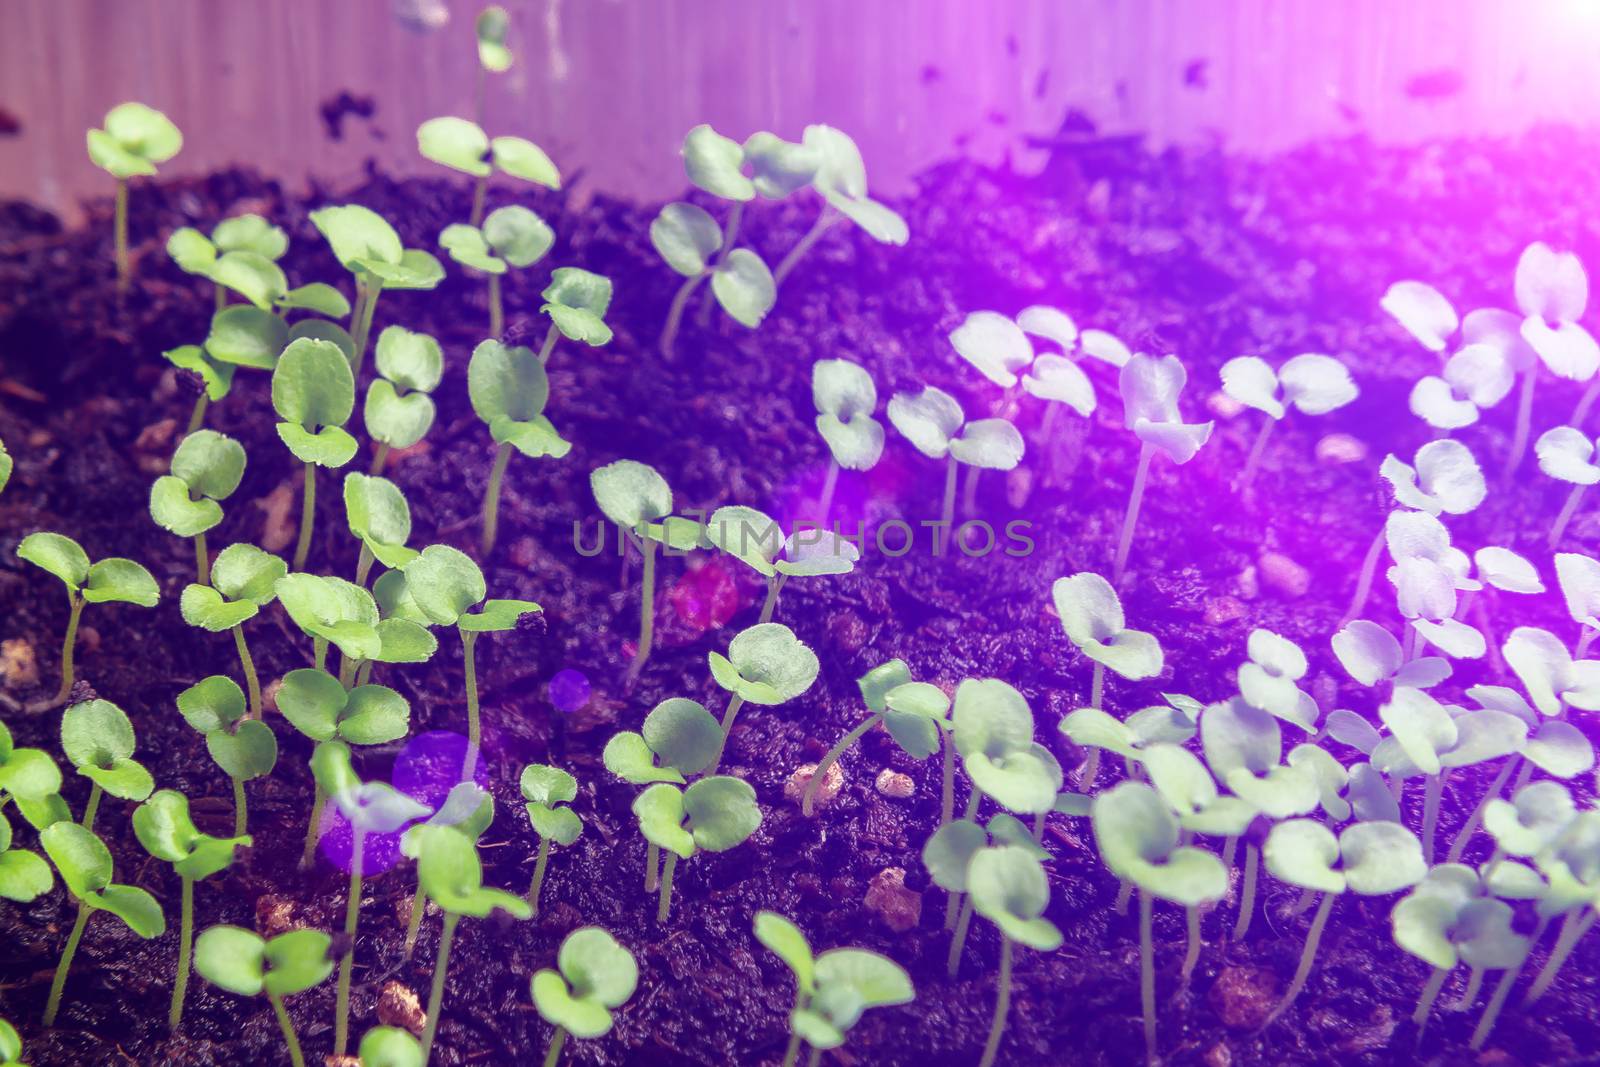 Growing seedlings under special artificial LED lamps with a spectrum favorable for plants without sunlight by galsand